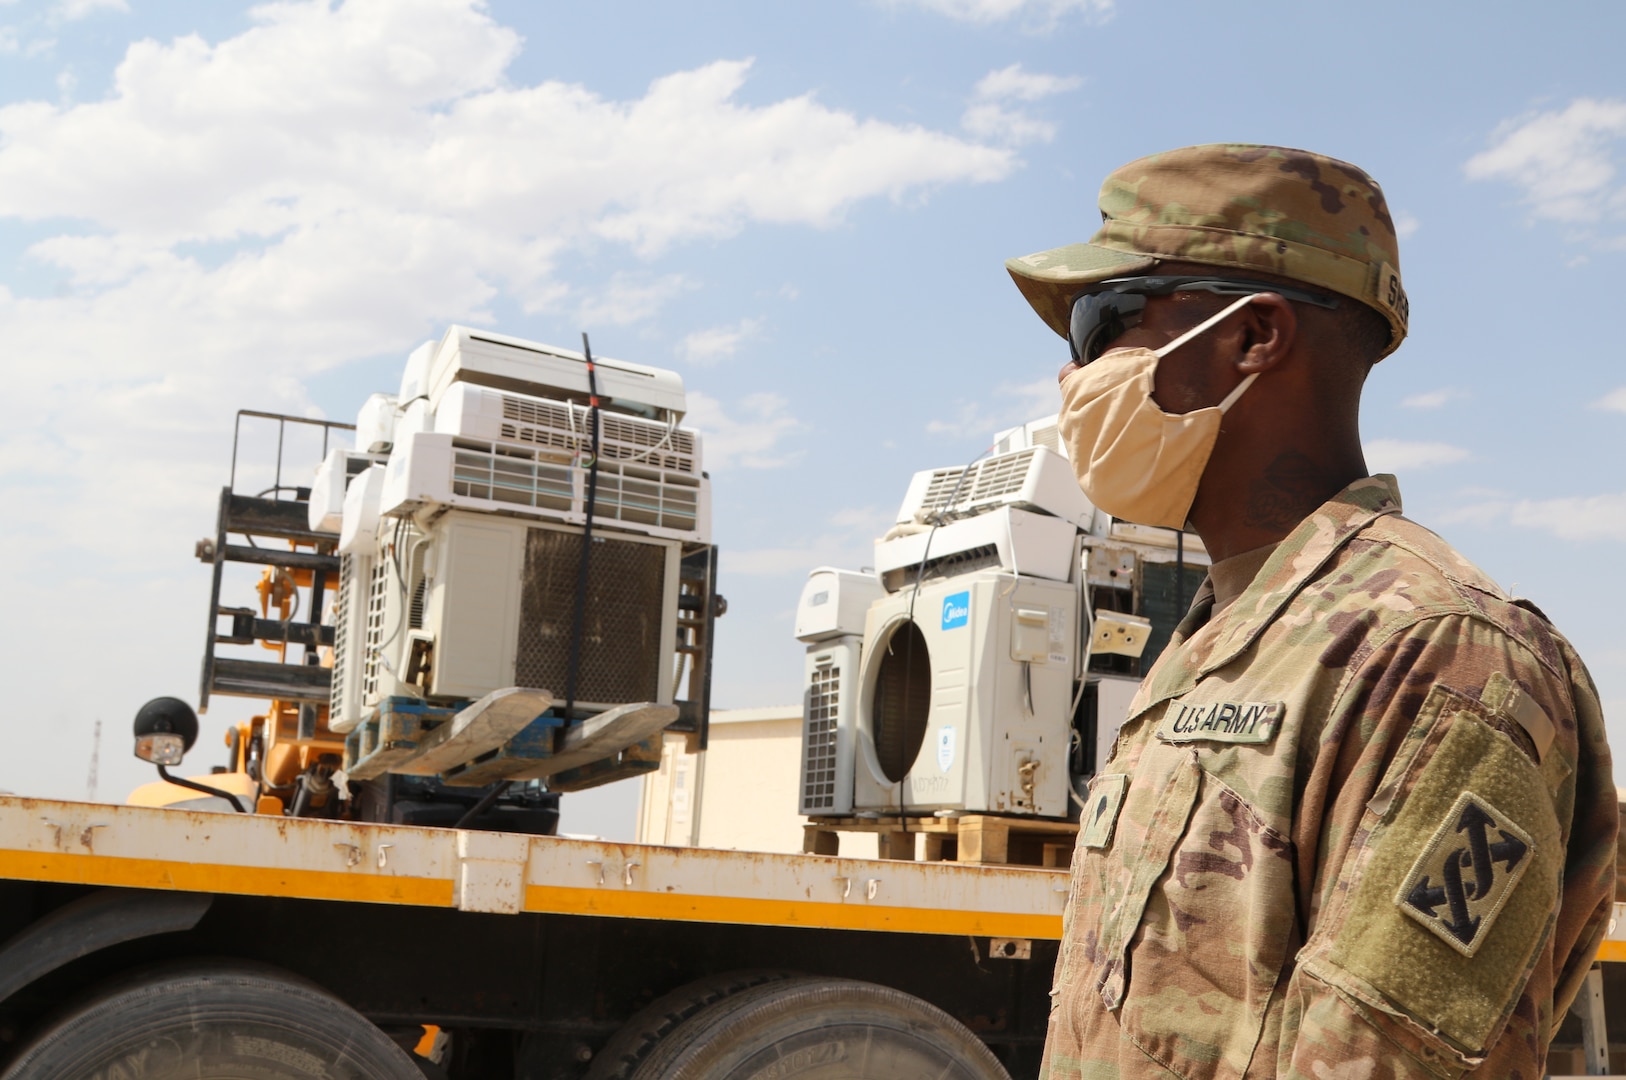 U.S. Army Spc. Eric S. Shepherd, 207th Regional Support Group services NCO, supervises the disposal of broken equipment at Al Asad Air Base, Iraq, July, 10, 2020. The Army Reserve unit provided life support services for three separate bases in Iraq through much of 2020 in support of Operation Inherent Resolve. Coalition Forces continue to work with allies and partners for a unified and determined mission to degrade and defeat Daesh. The unit is based in Fort Jackson, S.C. (U.S. Army photo by Sgt. 1st Class Gary A. Witte, 207th Regional Support Group)